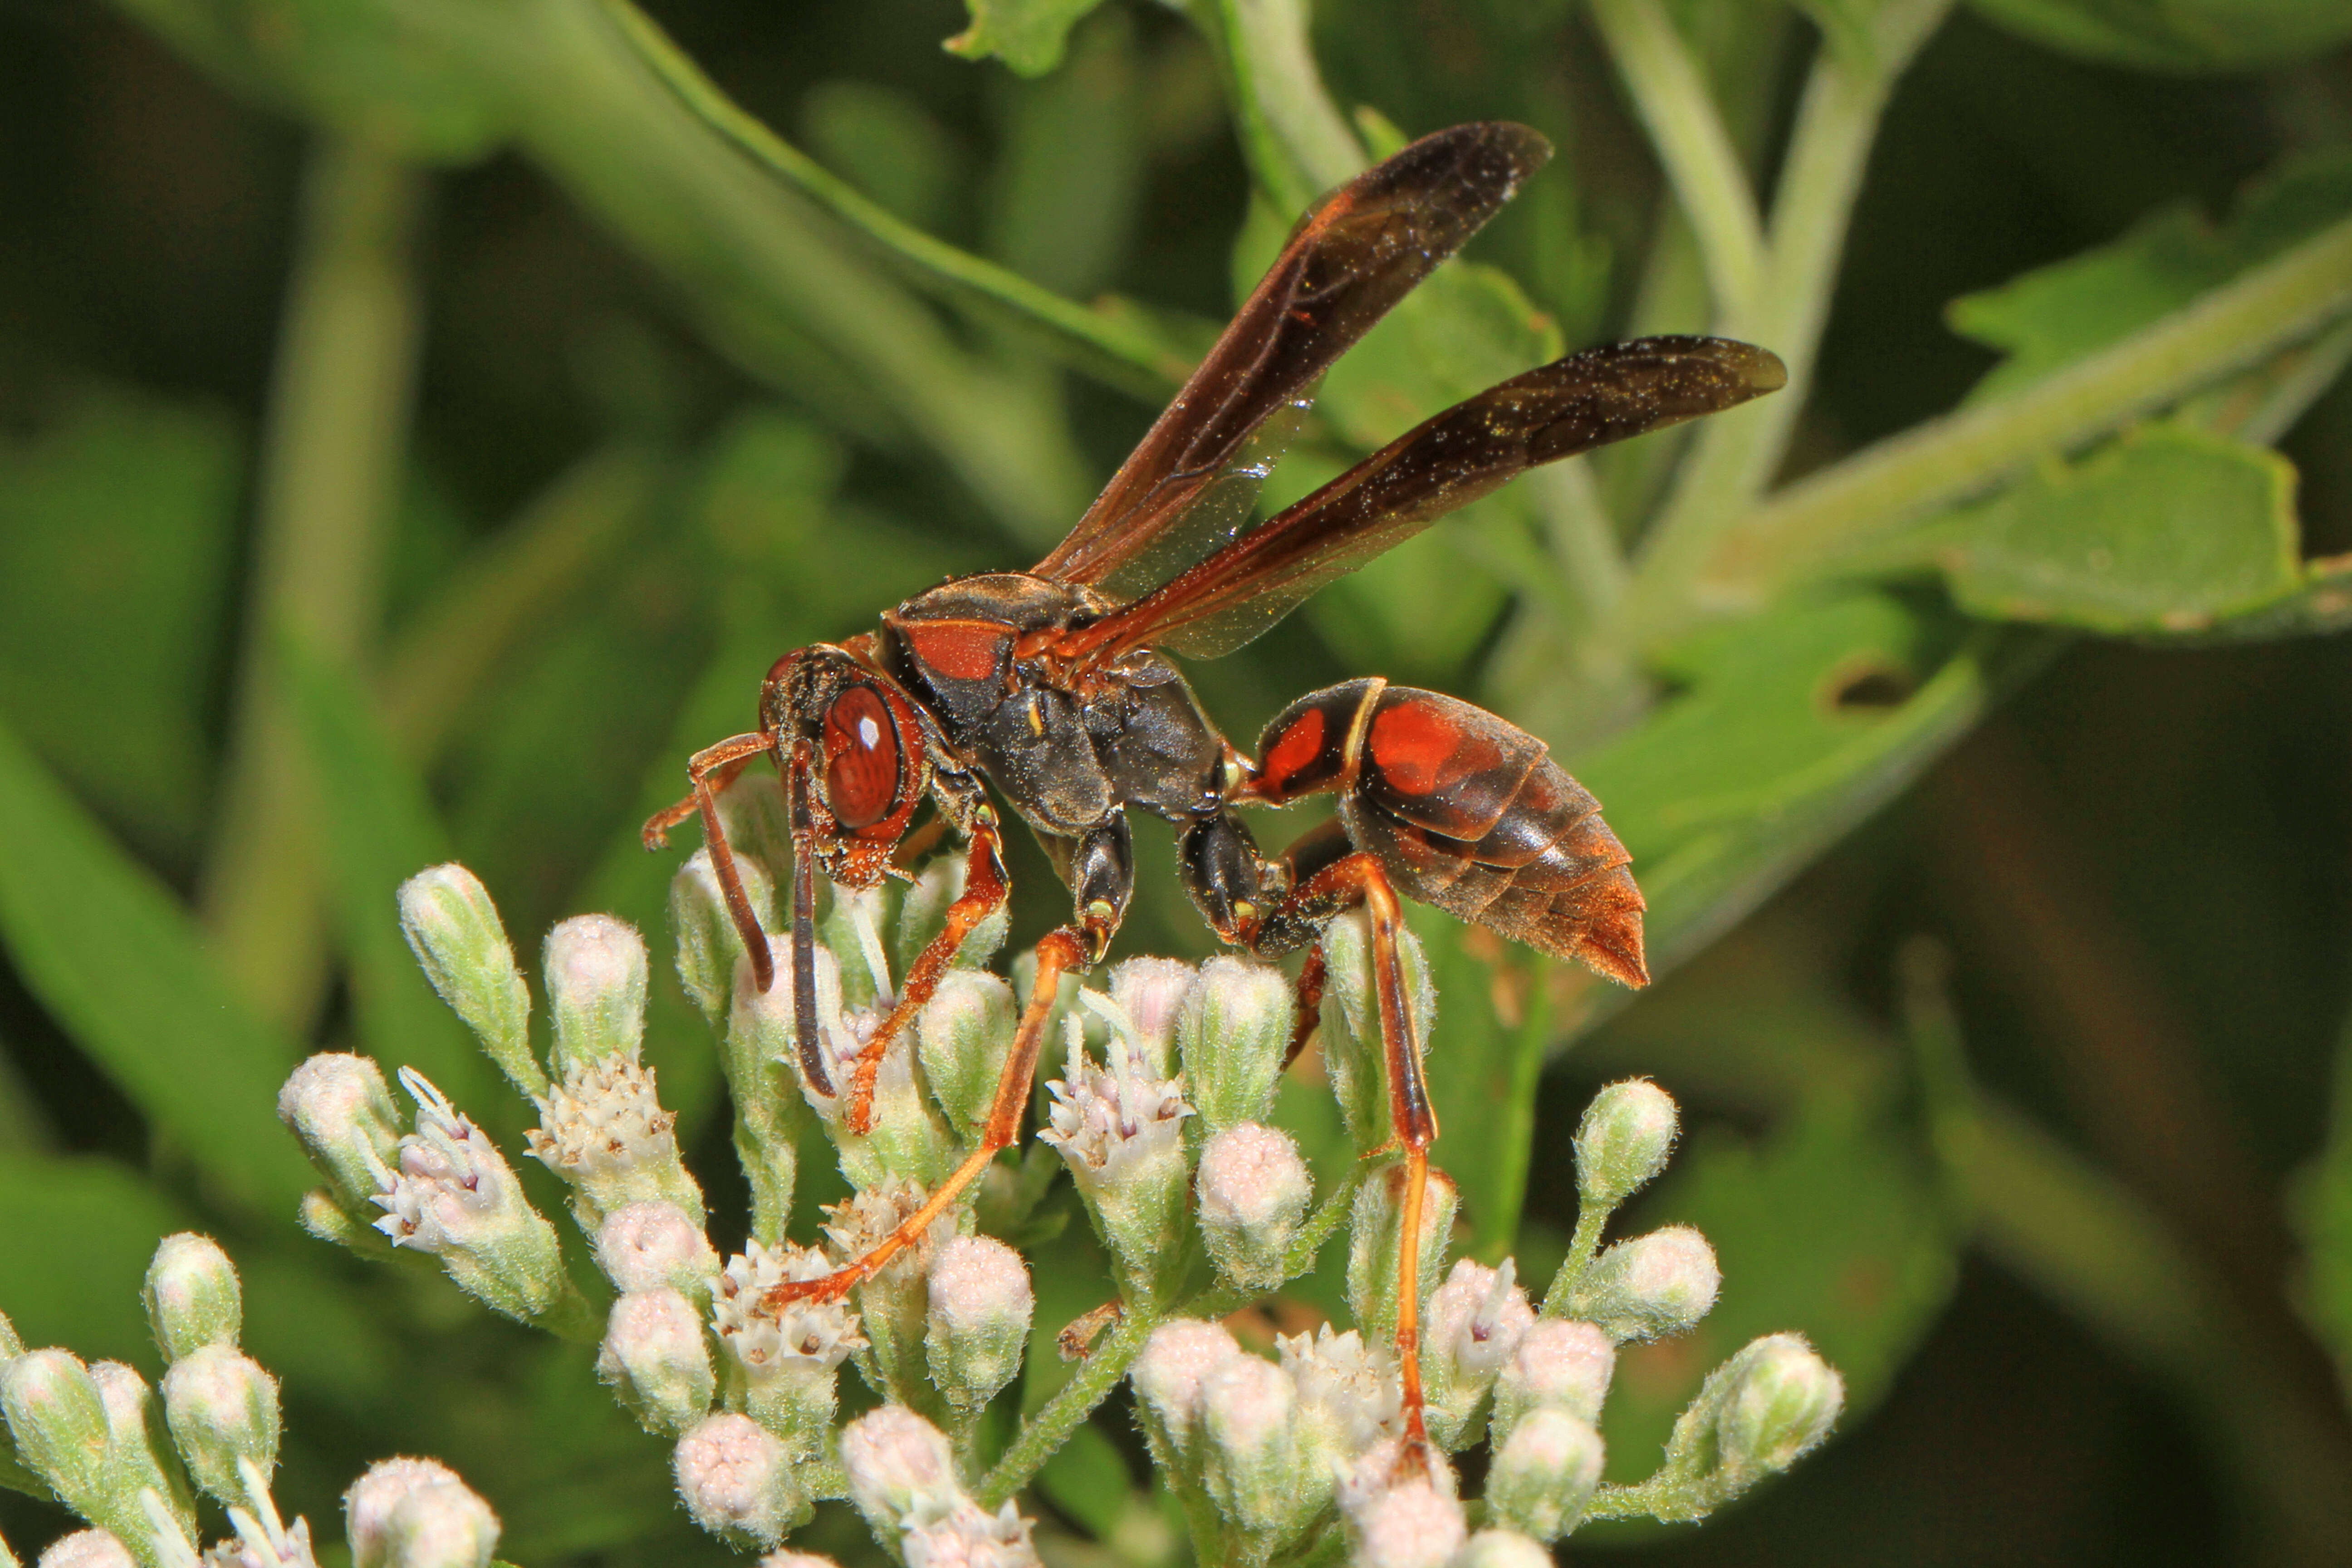 Image of Northern Paper Wasp